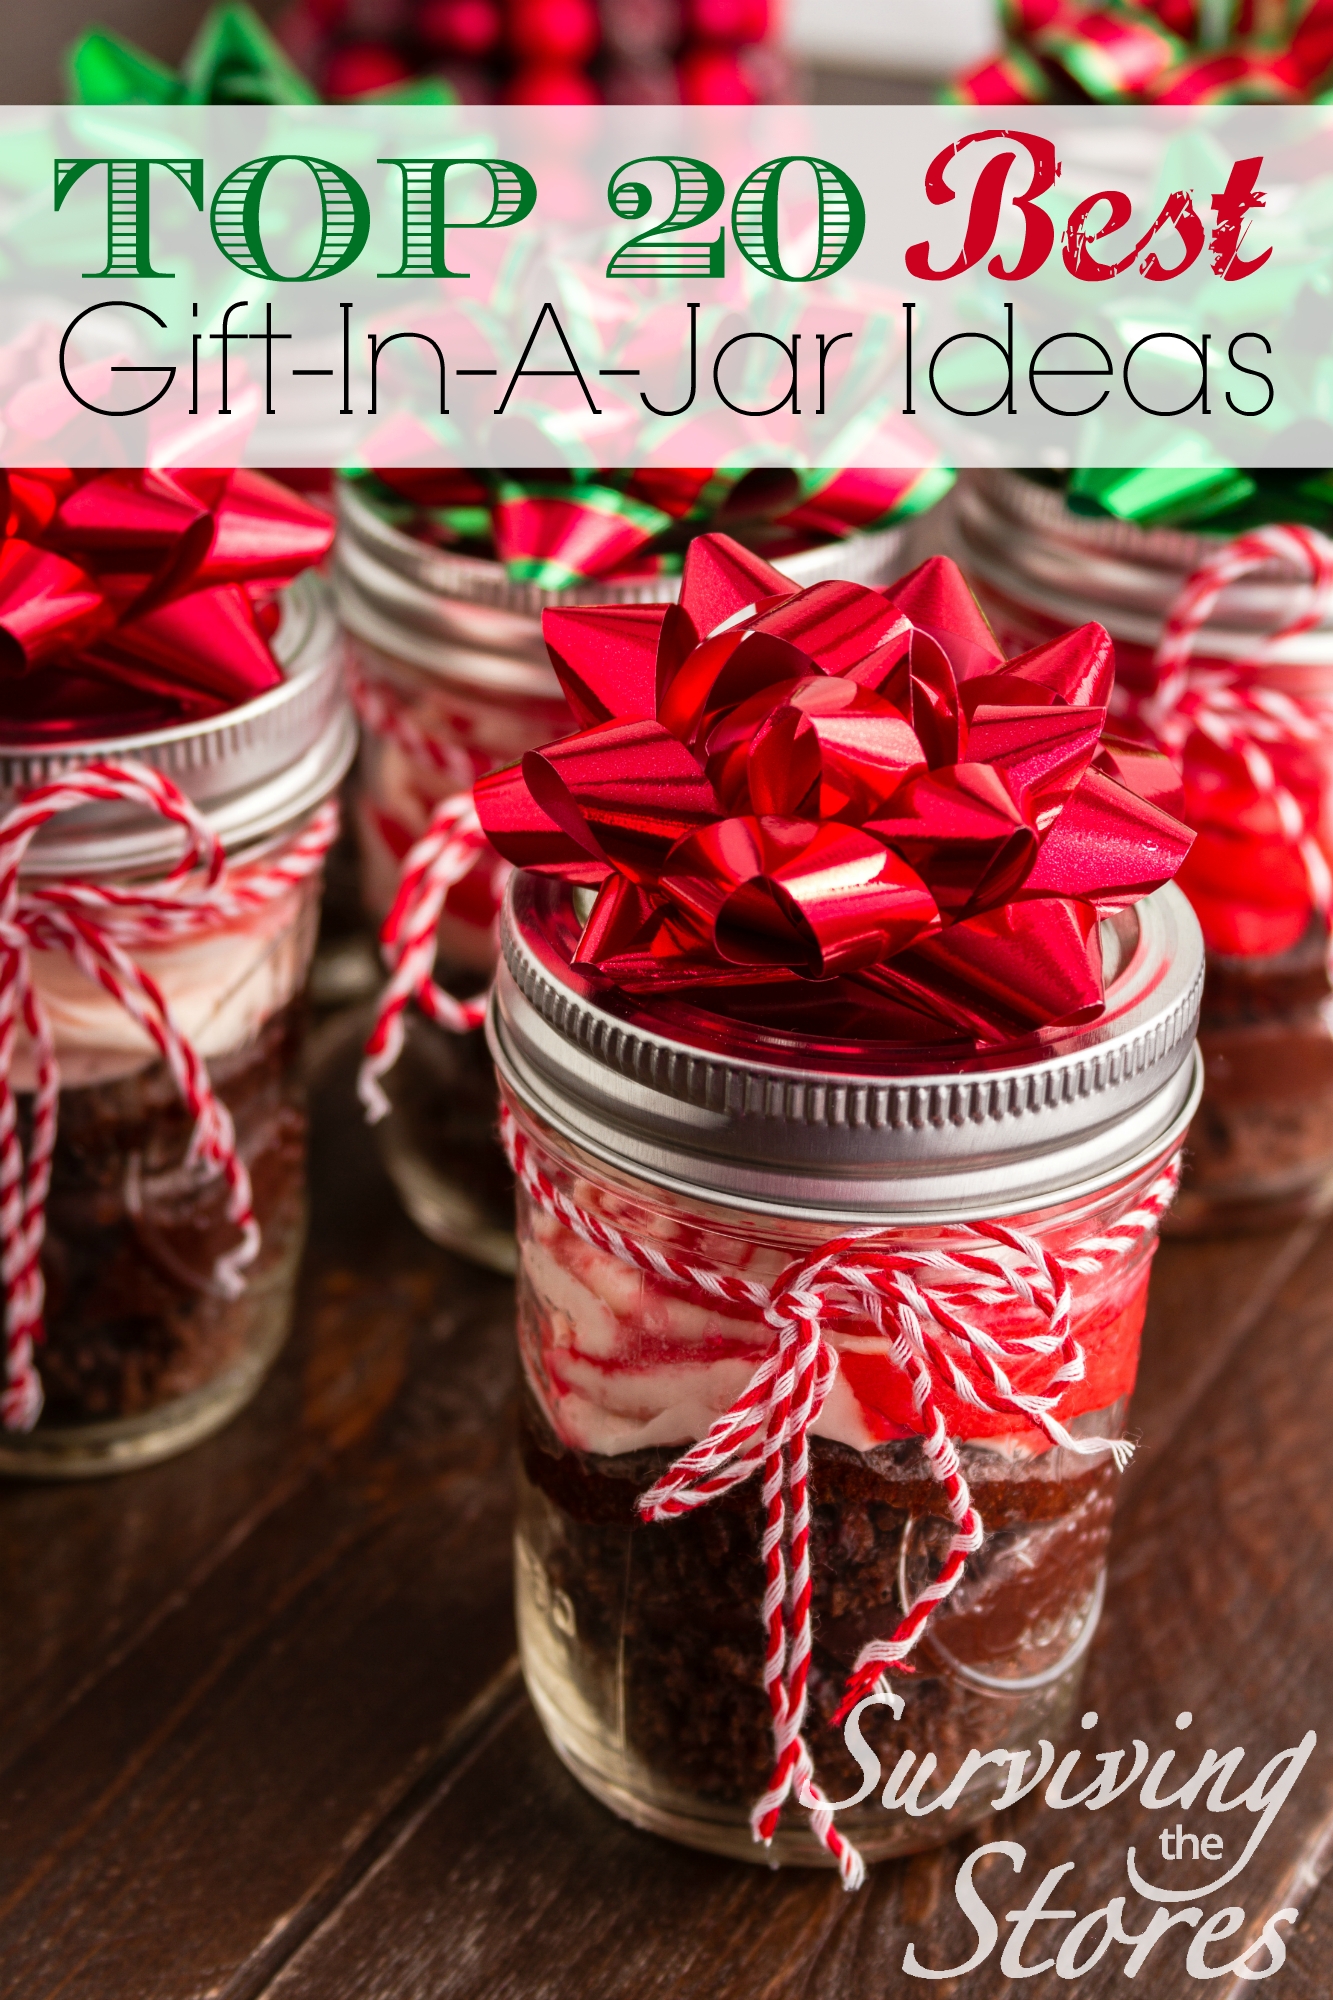 10 Elegant Gifts In A Jar Ideas 20 unique ideas for gifts in a jar 1 2023